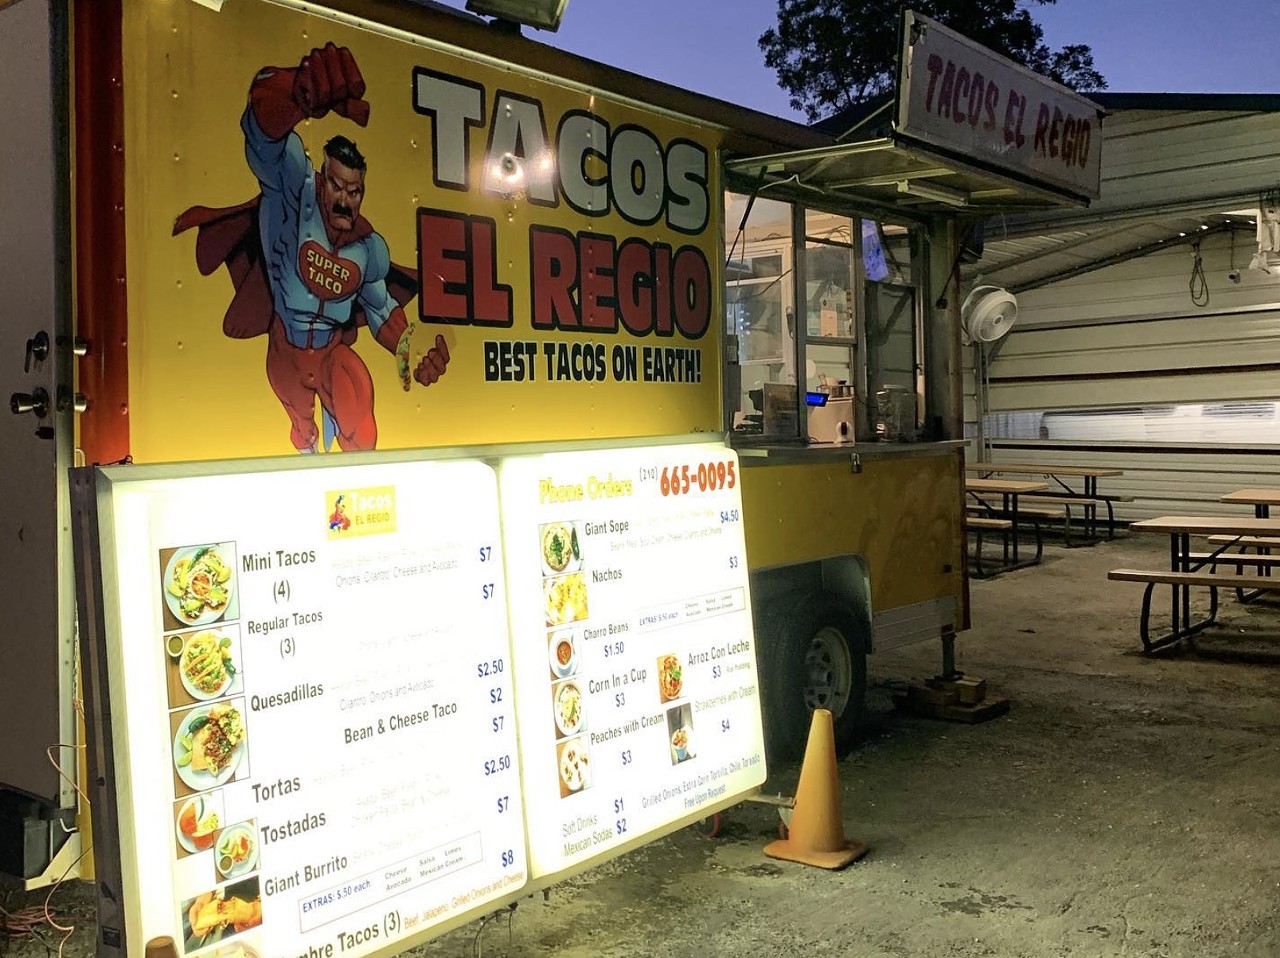 Tacos El Regio
Multiple Locations, tacoselregiosatx.com
This gem of a taco truck offers tasty mobile Mexican street food and simple yet delicious tacos.